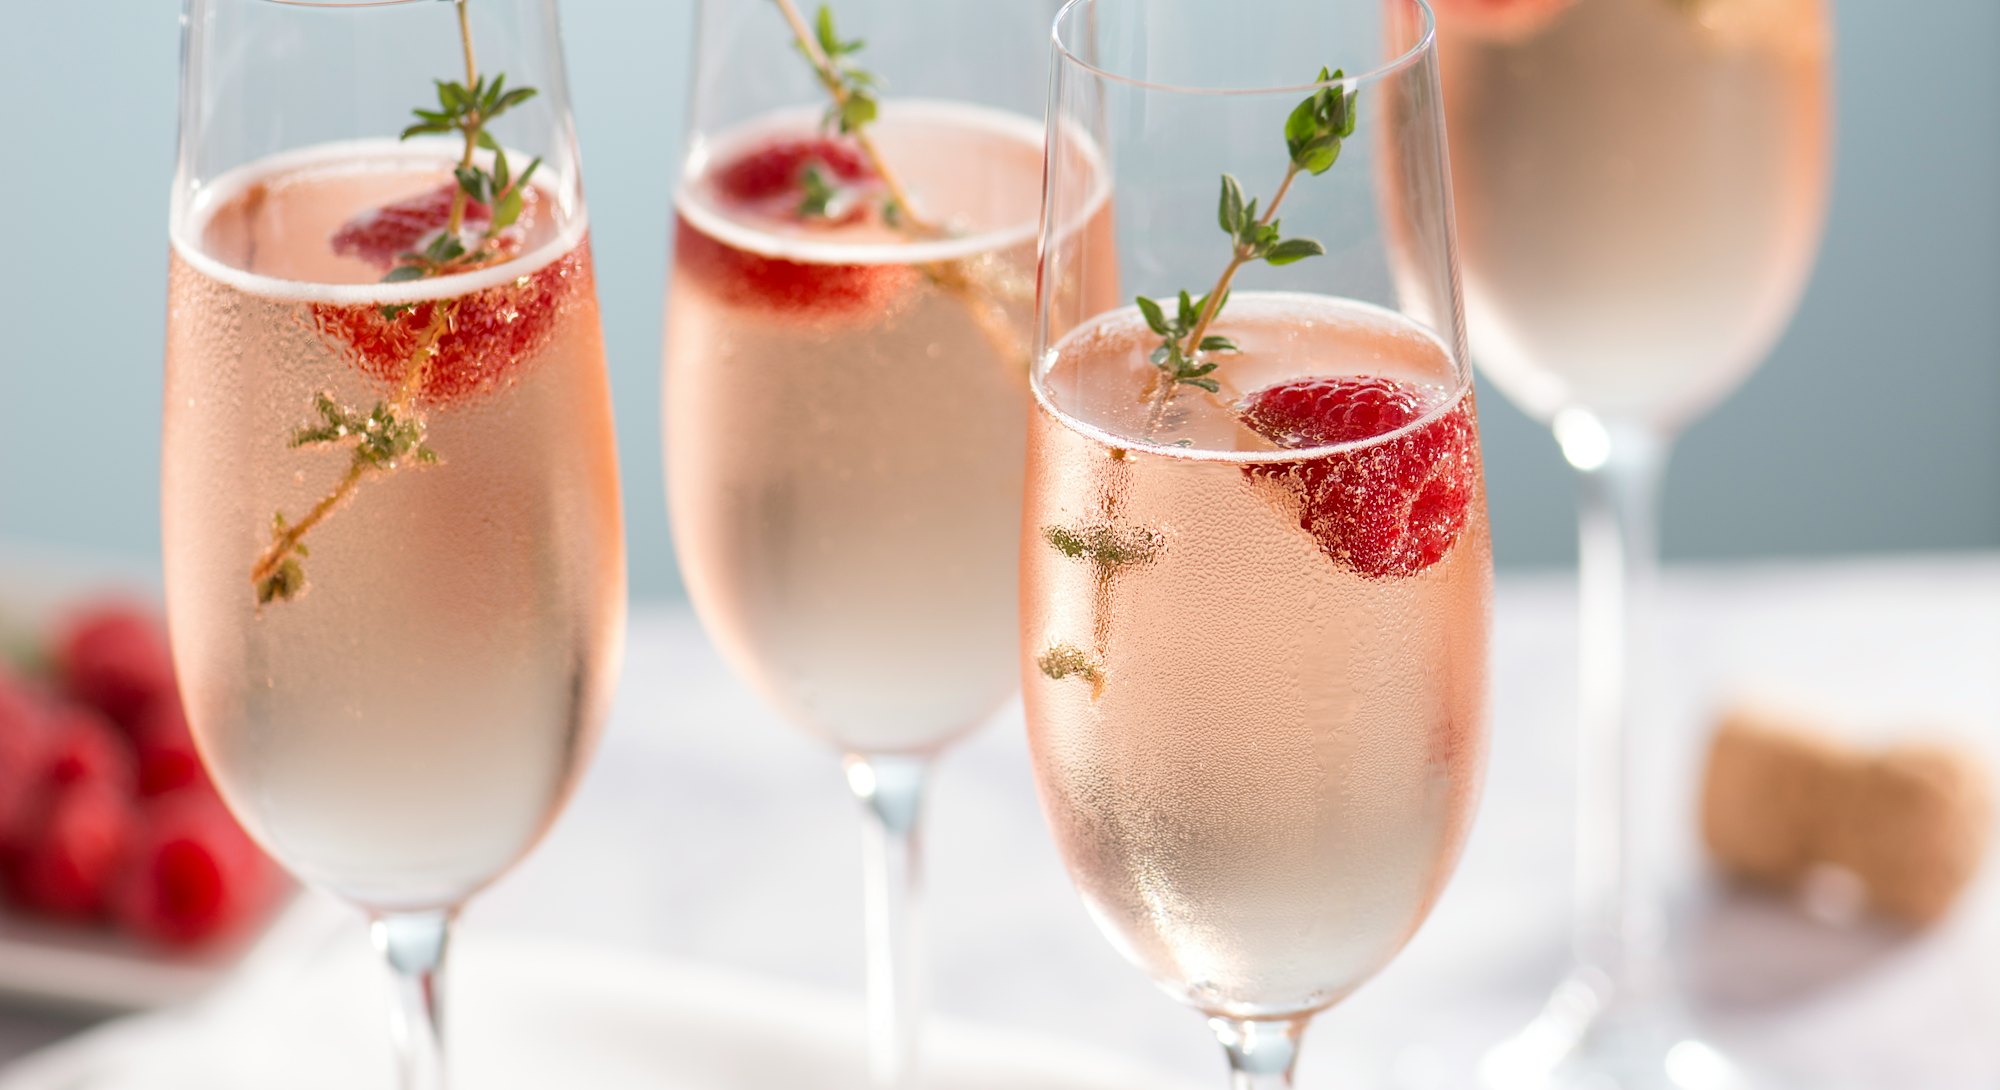 pink fizzy drink garnished with rosemary and thyme makes a delicious new year's mocktail